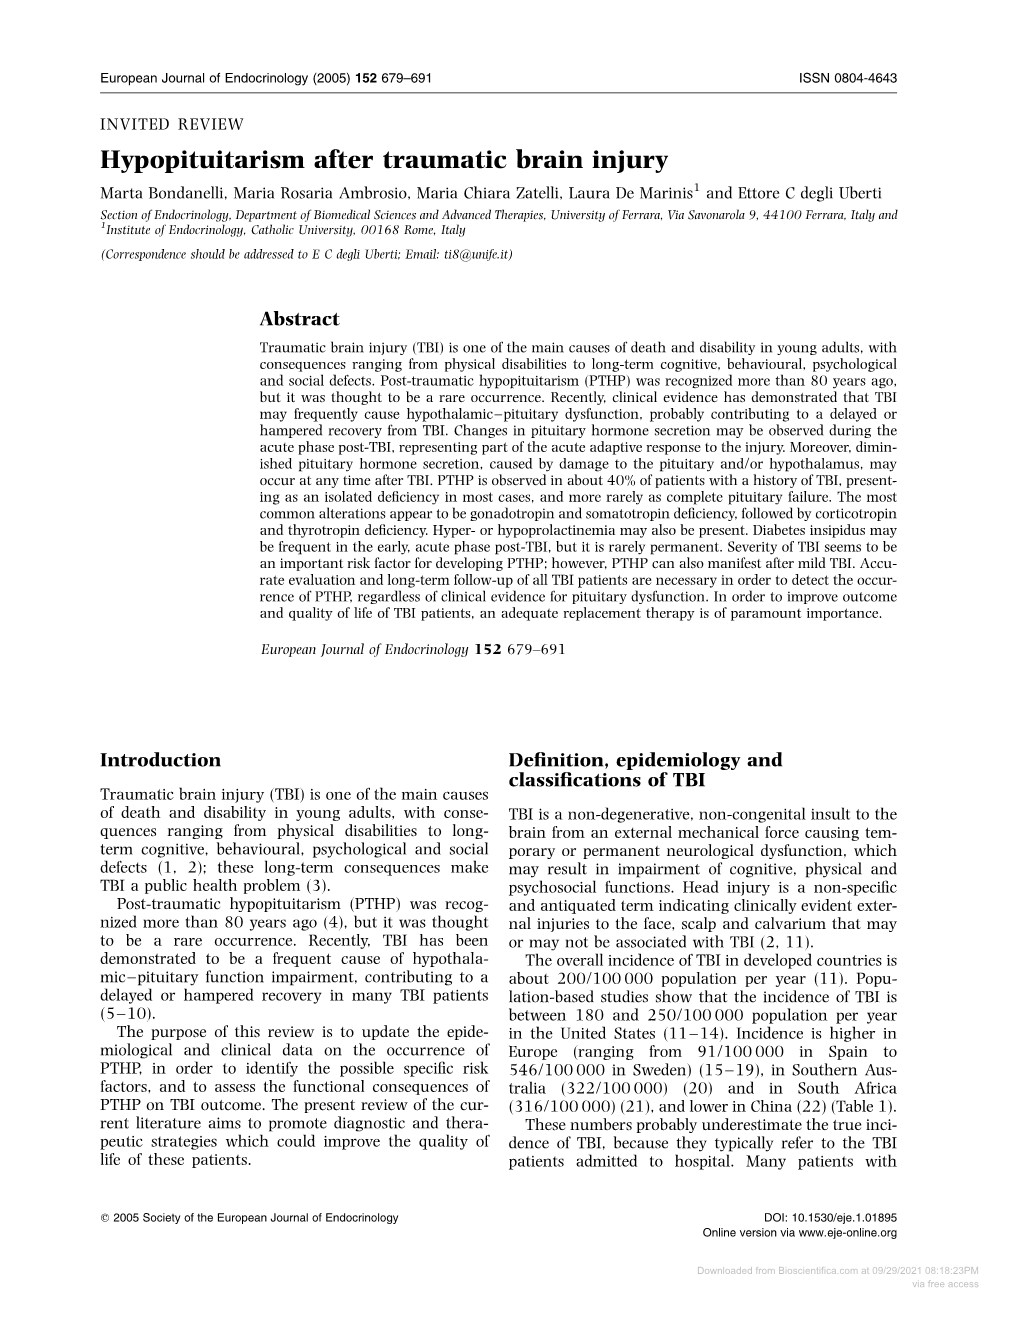 Hypopituitarism After Traumatic Brain Injury